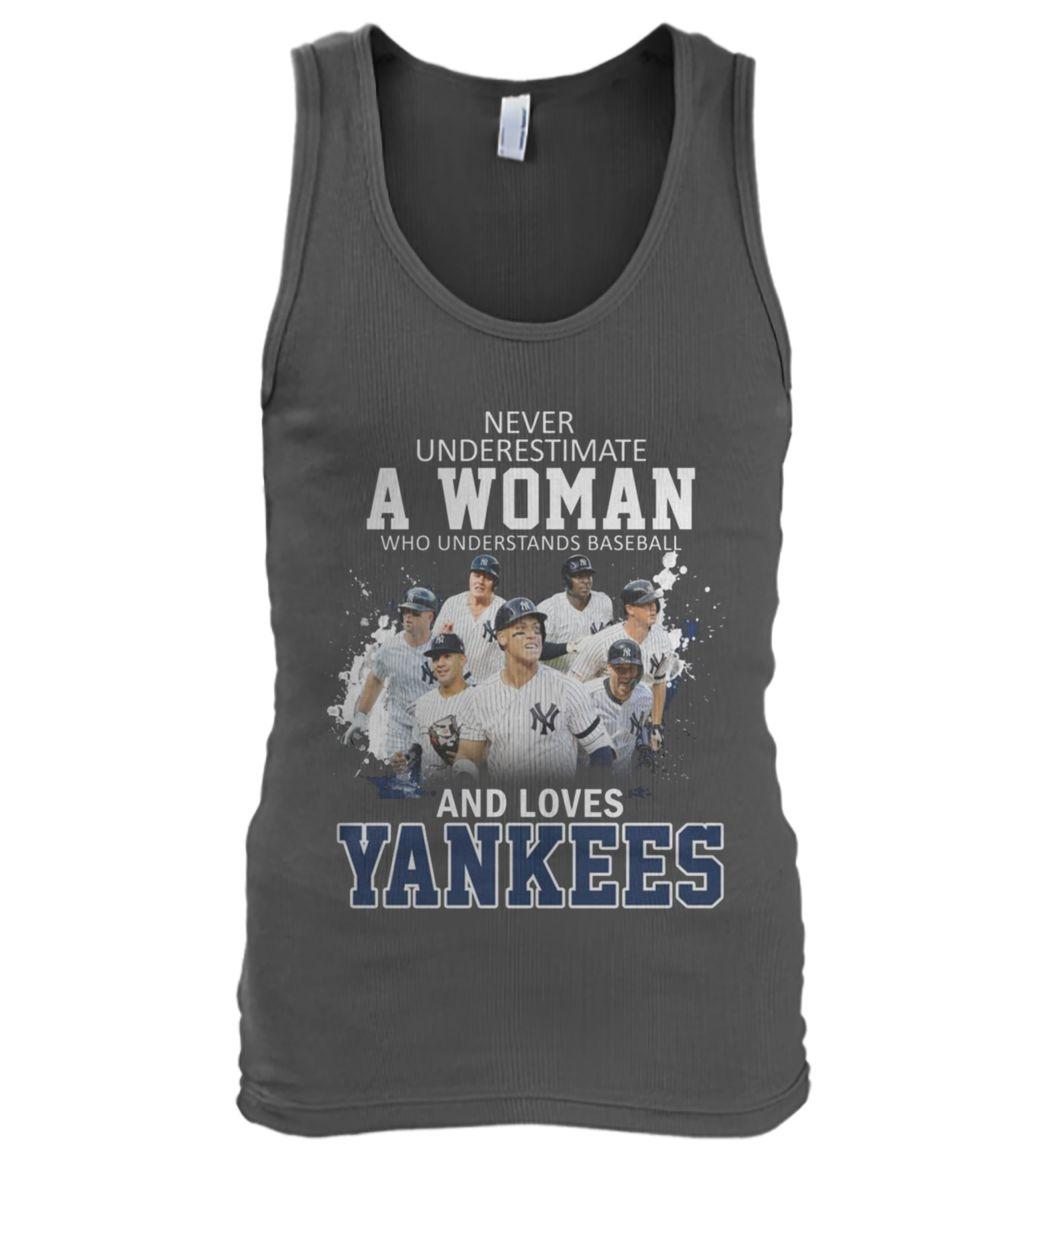 Never underestimate a woman who understands baseball and loves the yankees tank top